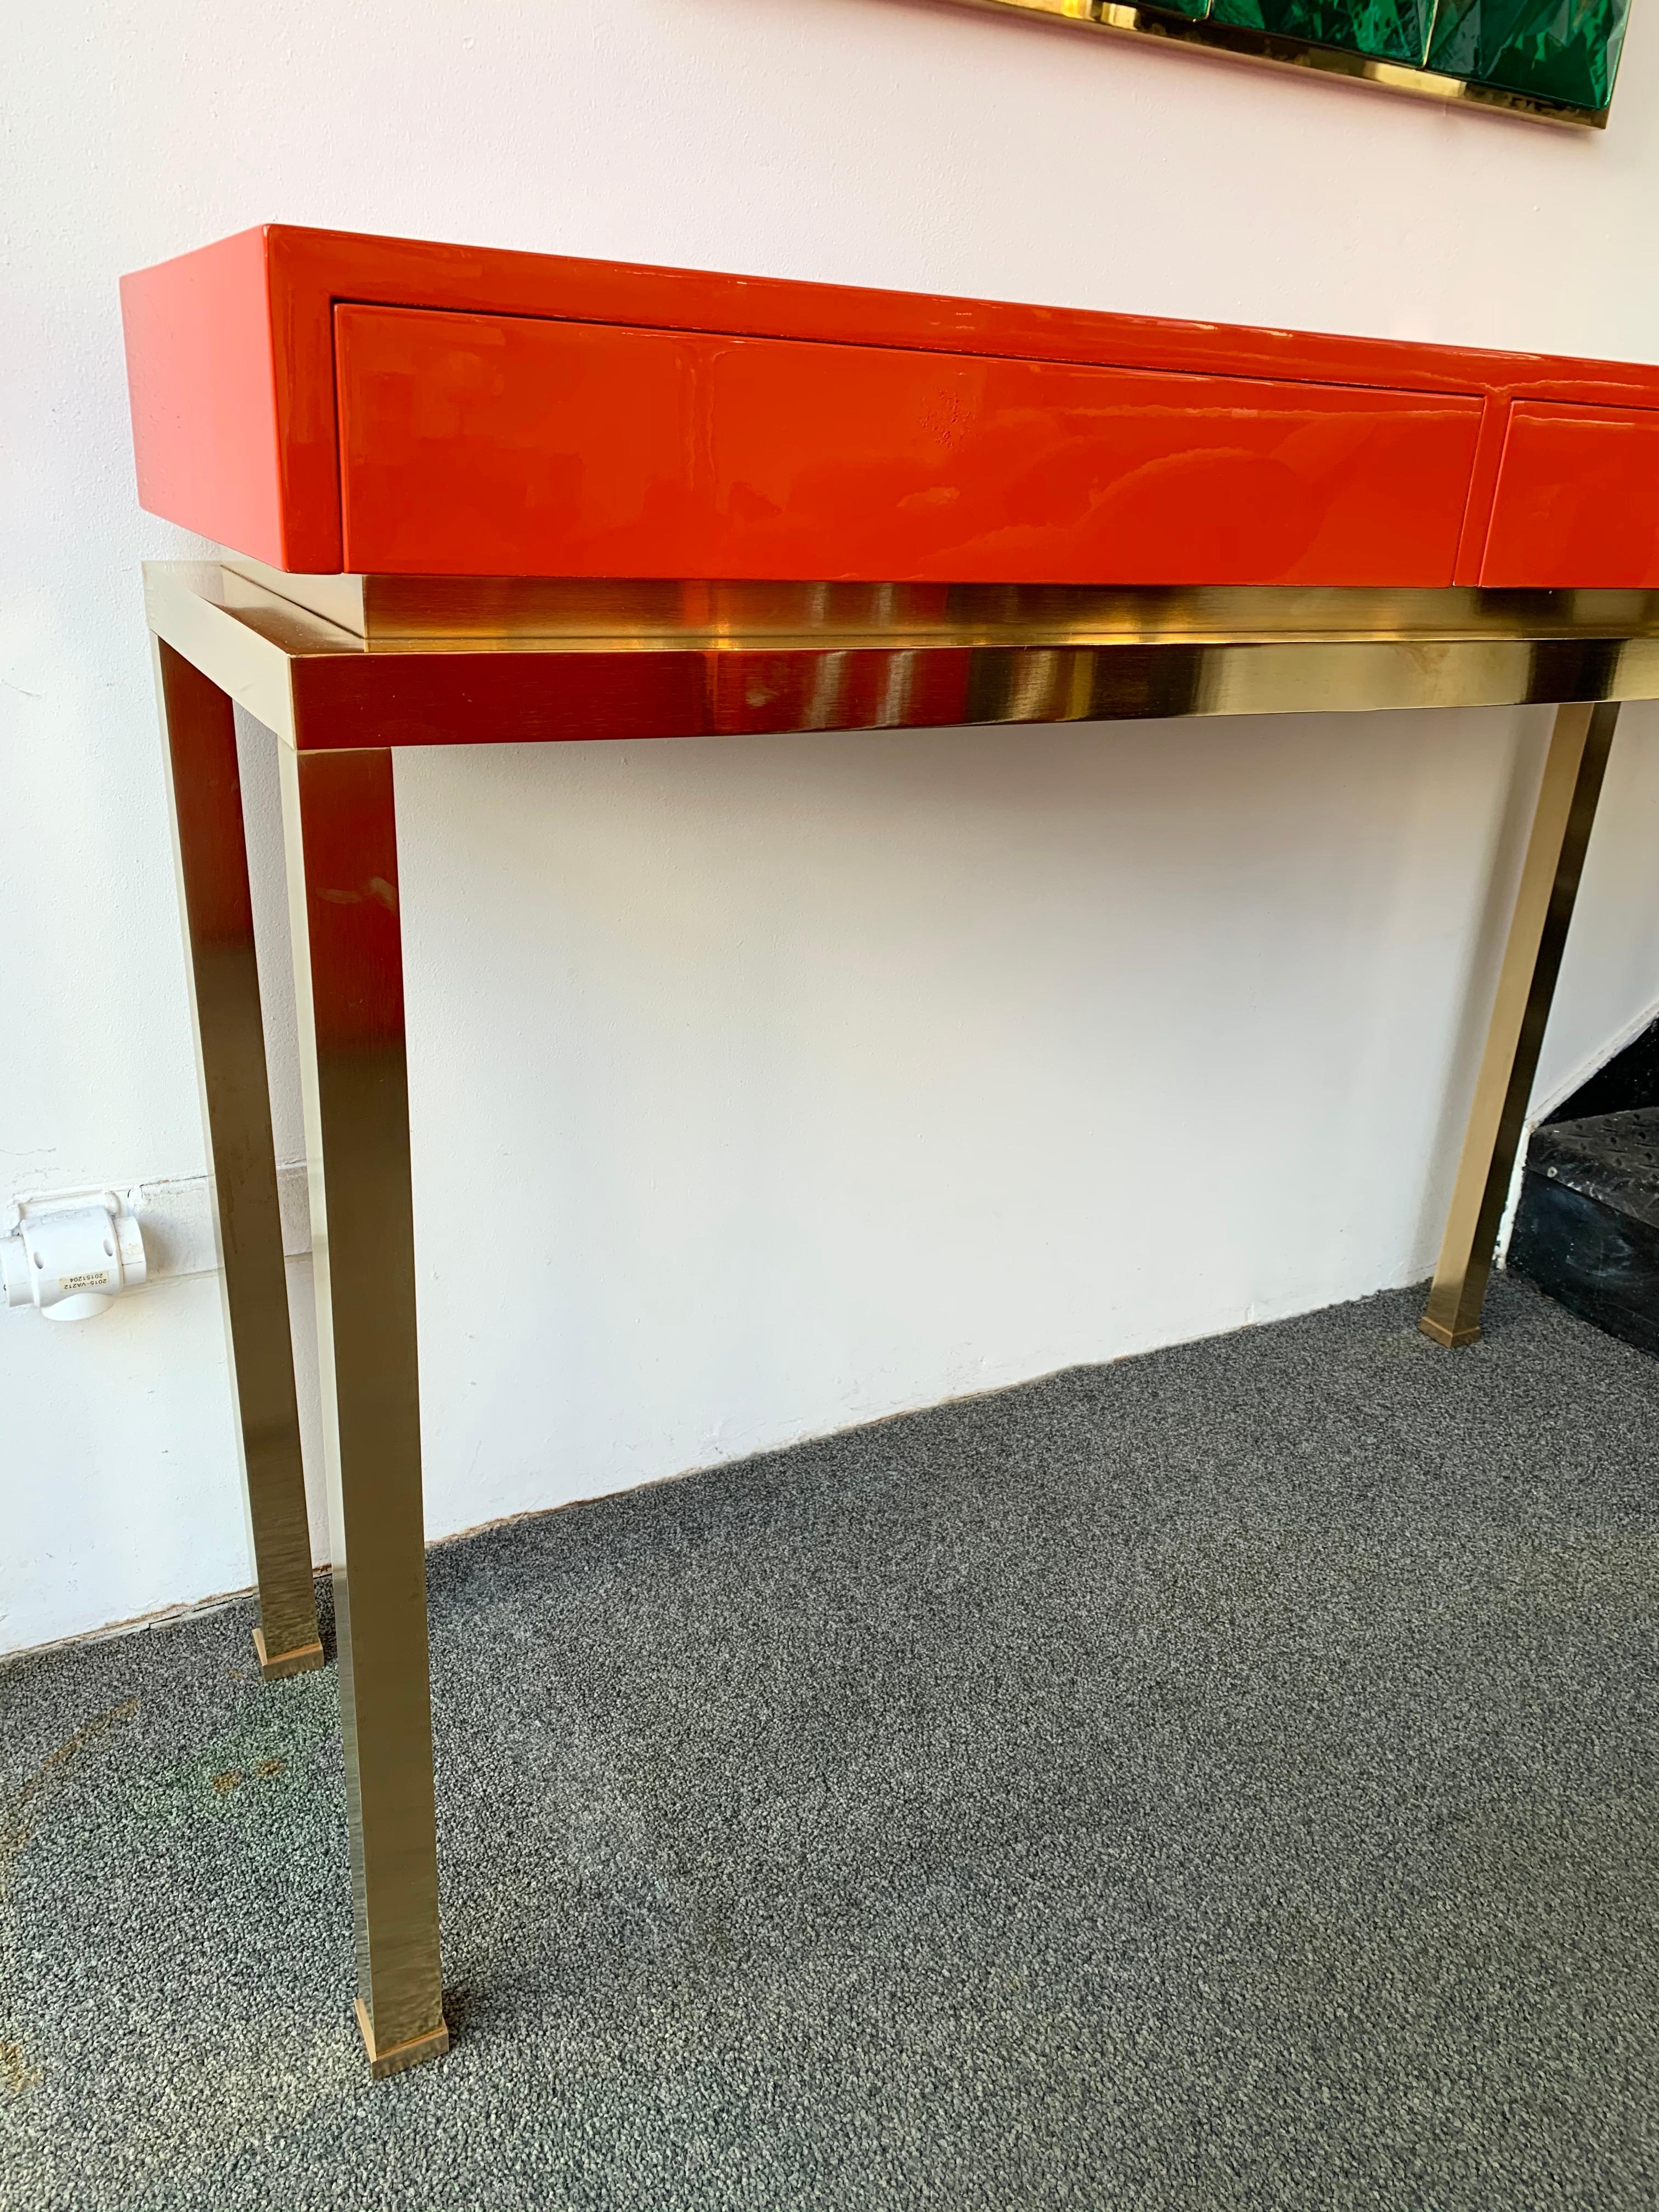 Console table orange coral lacquered wood with drawers, brass feet by Guy Lefèvre. Part of his production was presented by Maison Jansen during the 1970s. Famous design like Mahey, Willy Rizzo, Mario Sabot.